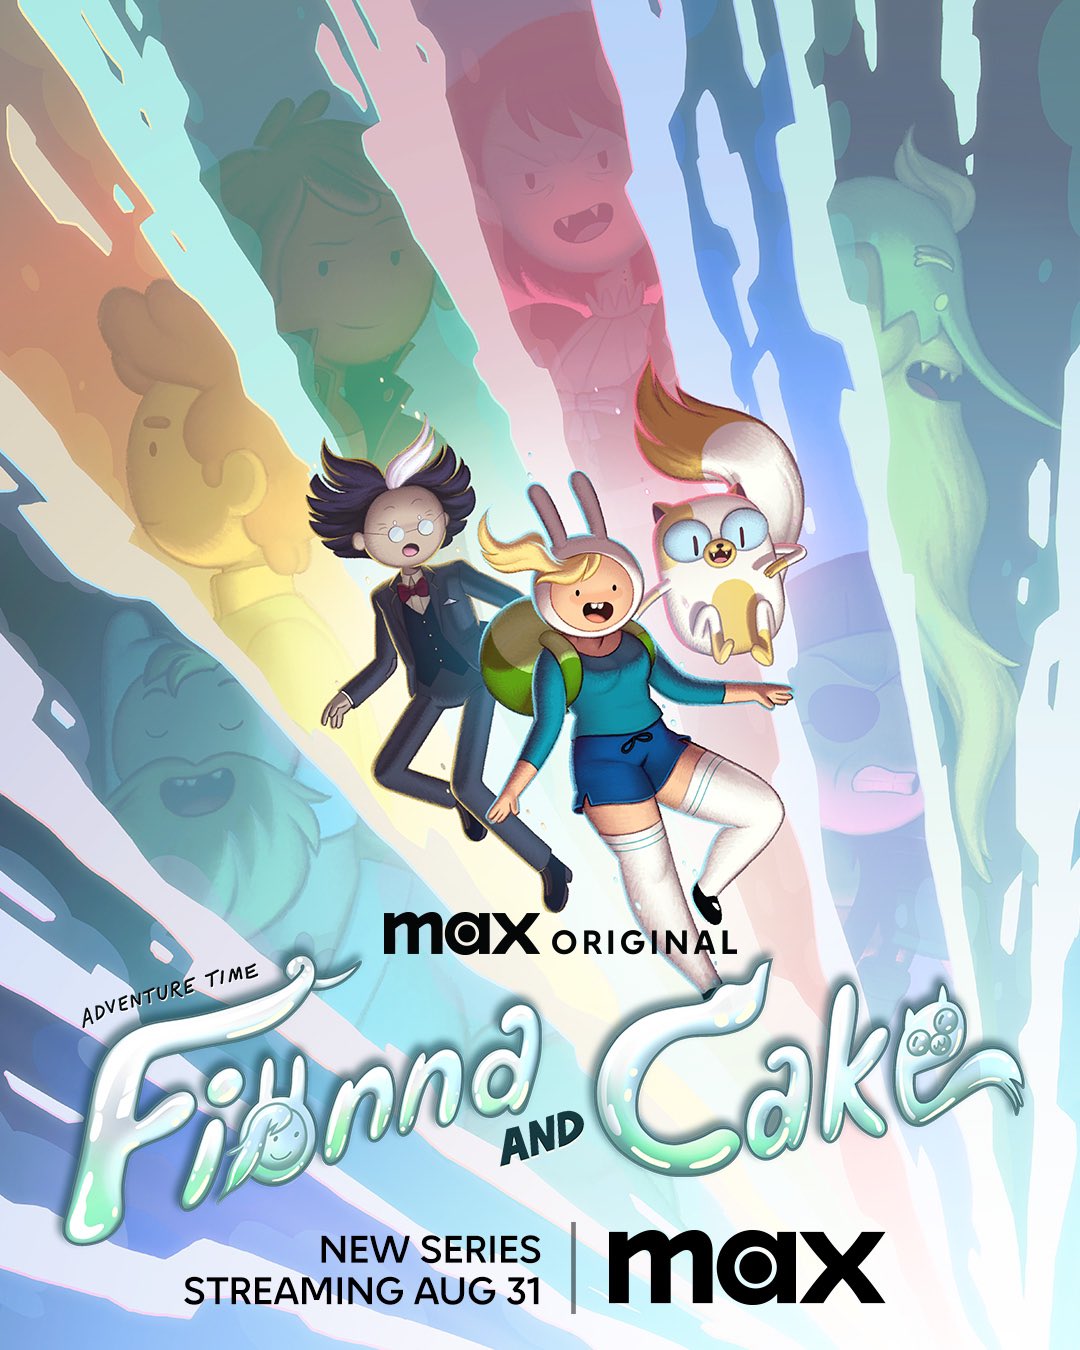 Fionna & Cake from Adventure Time. By Sukihi